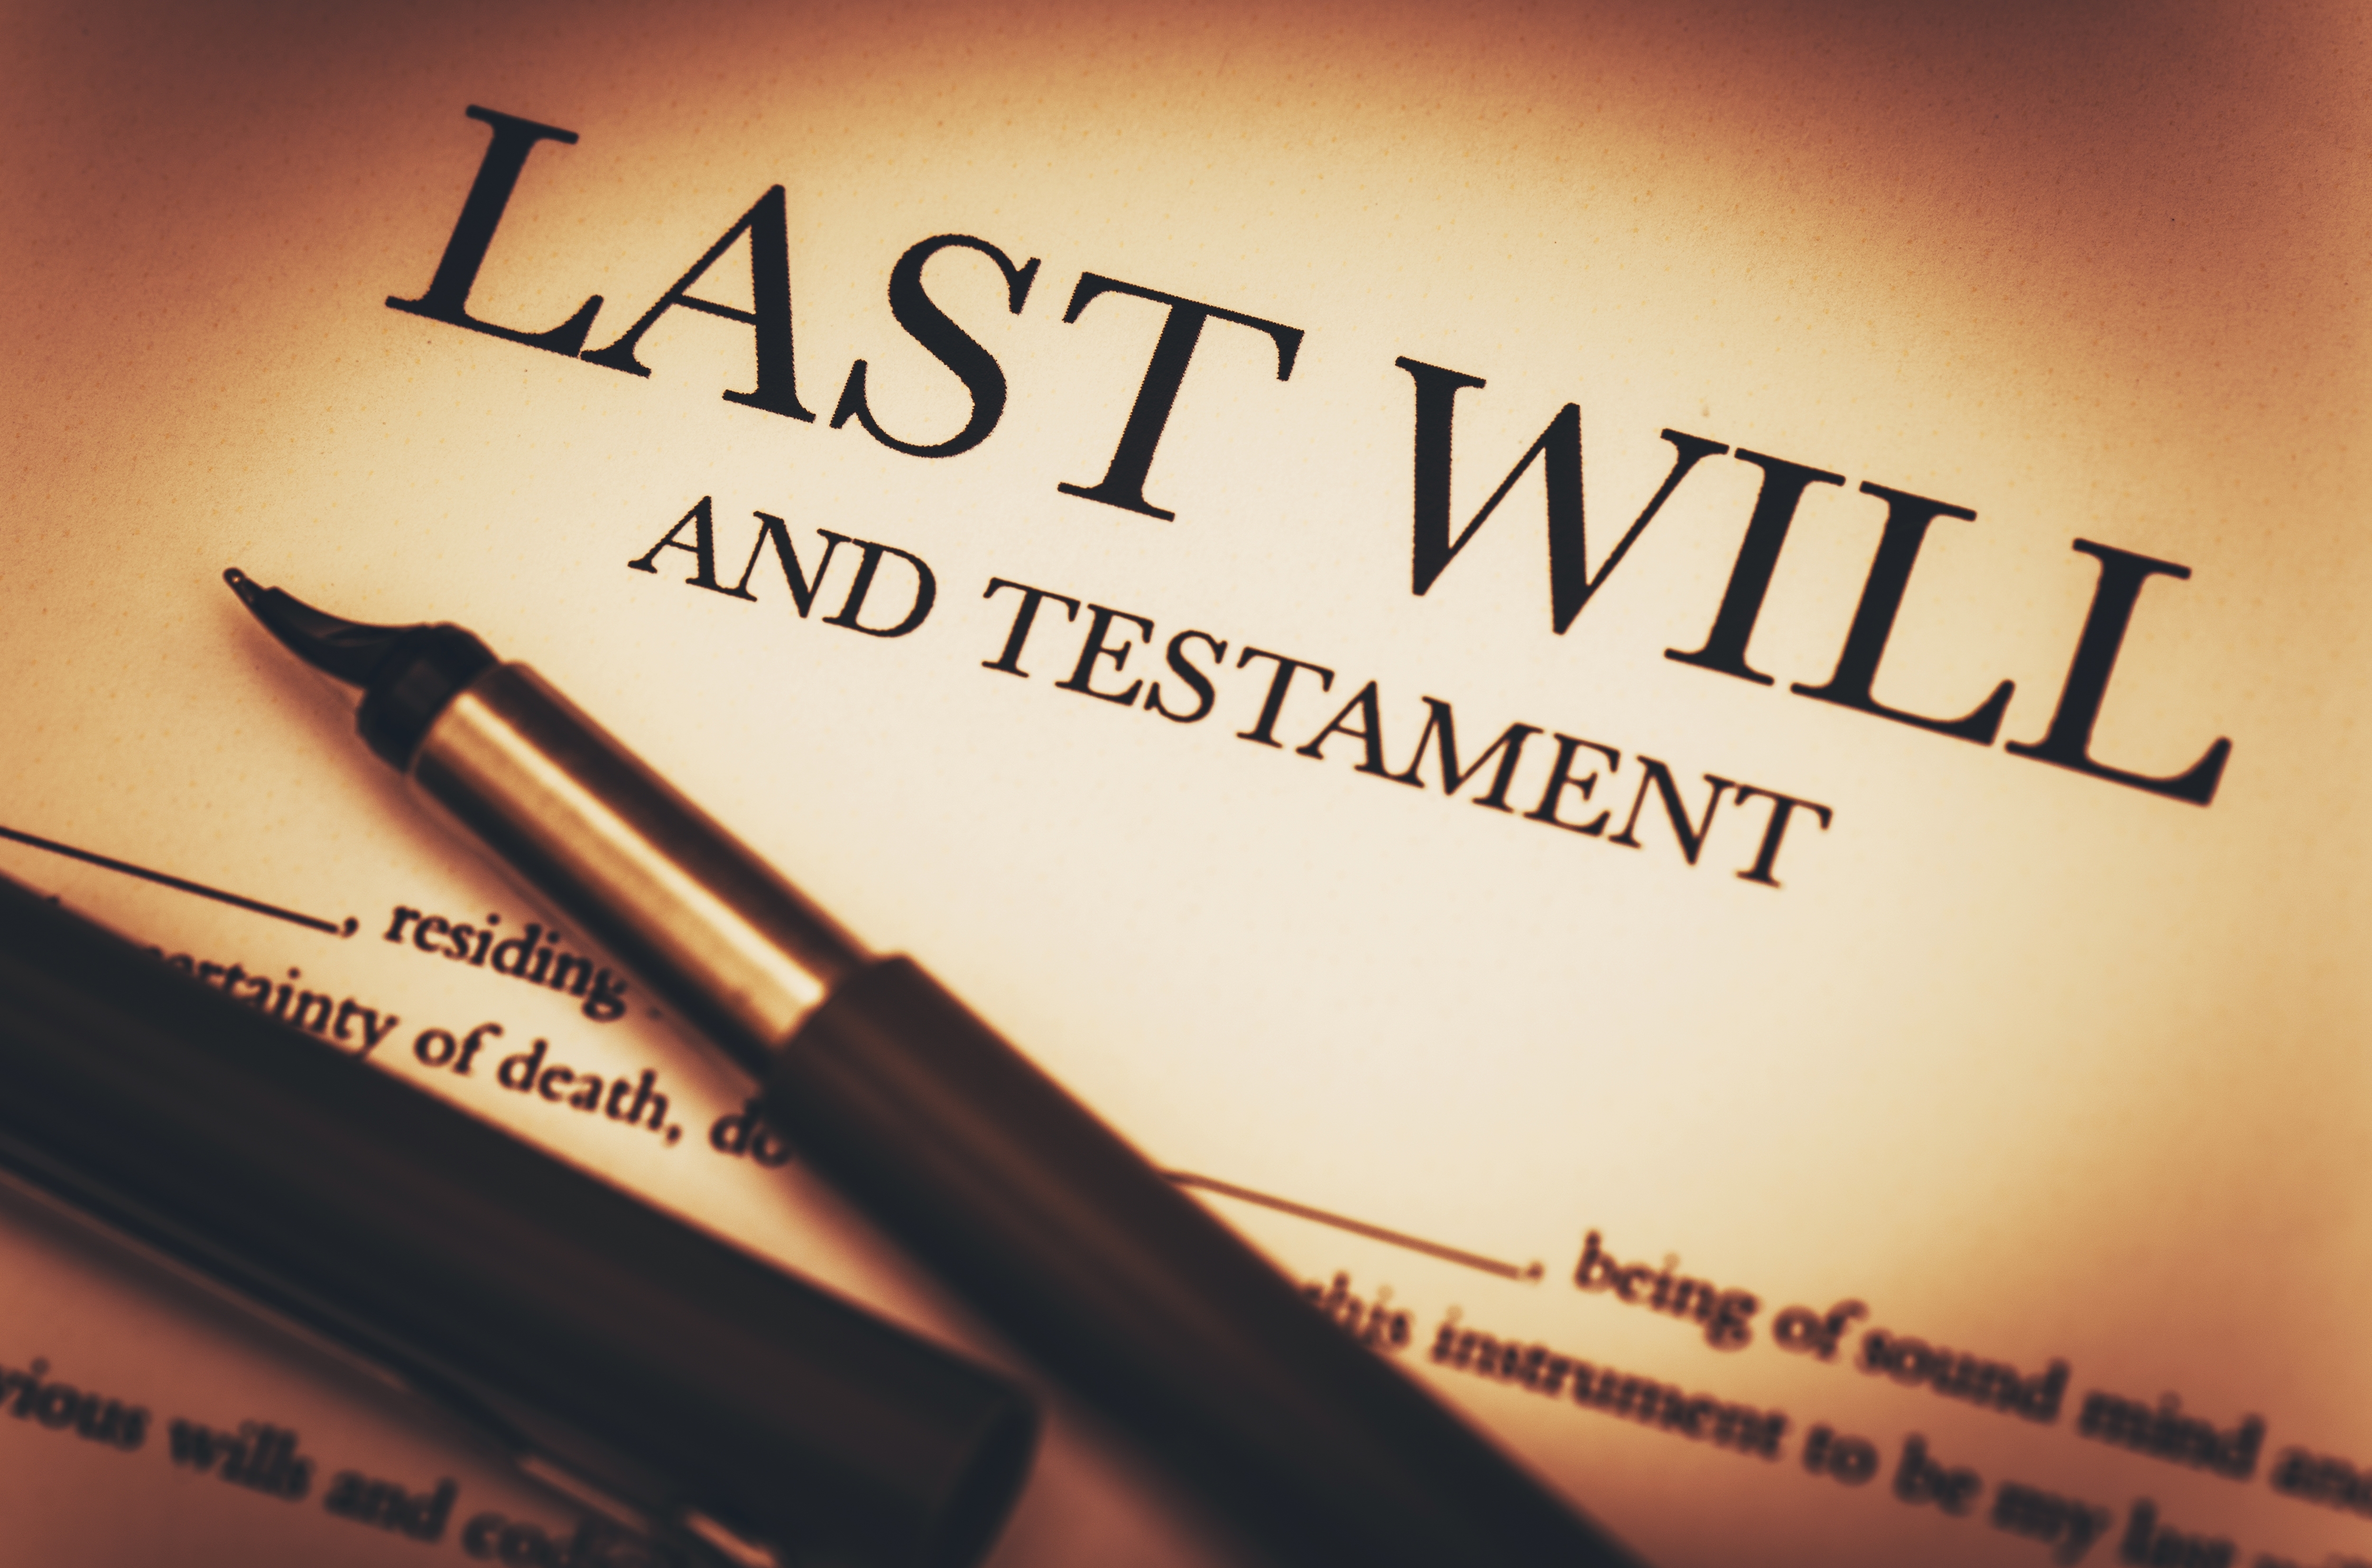 Close-up of a document with the title "Last Will and Testament" | Source: Shutterstock